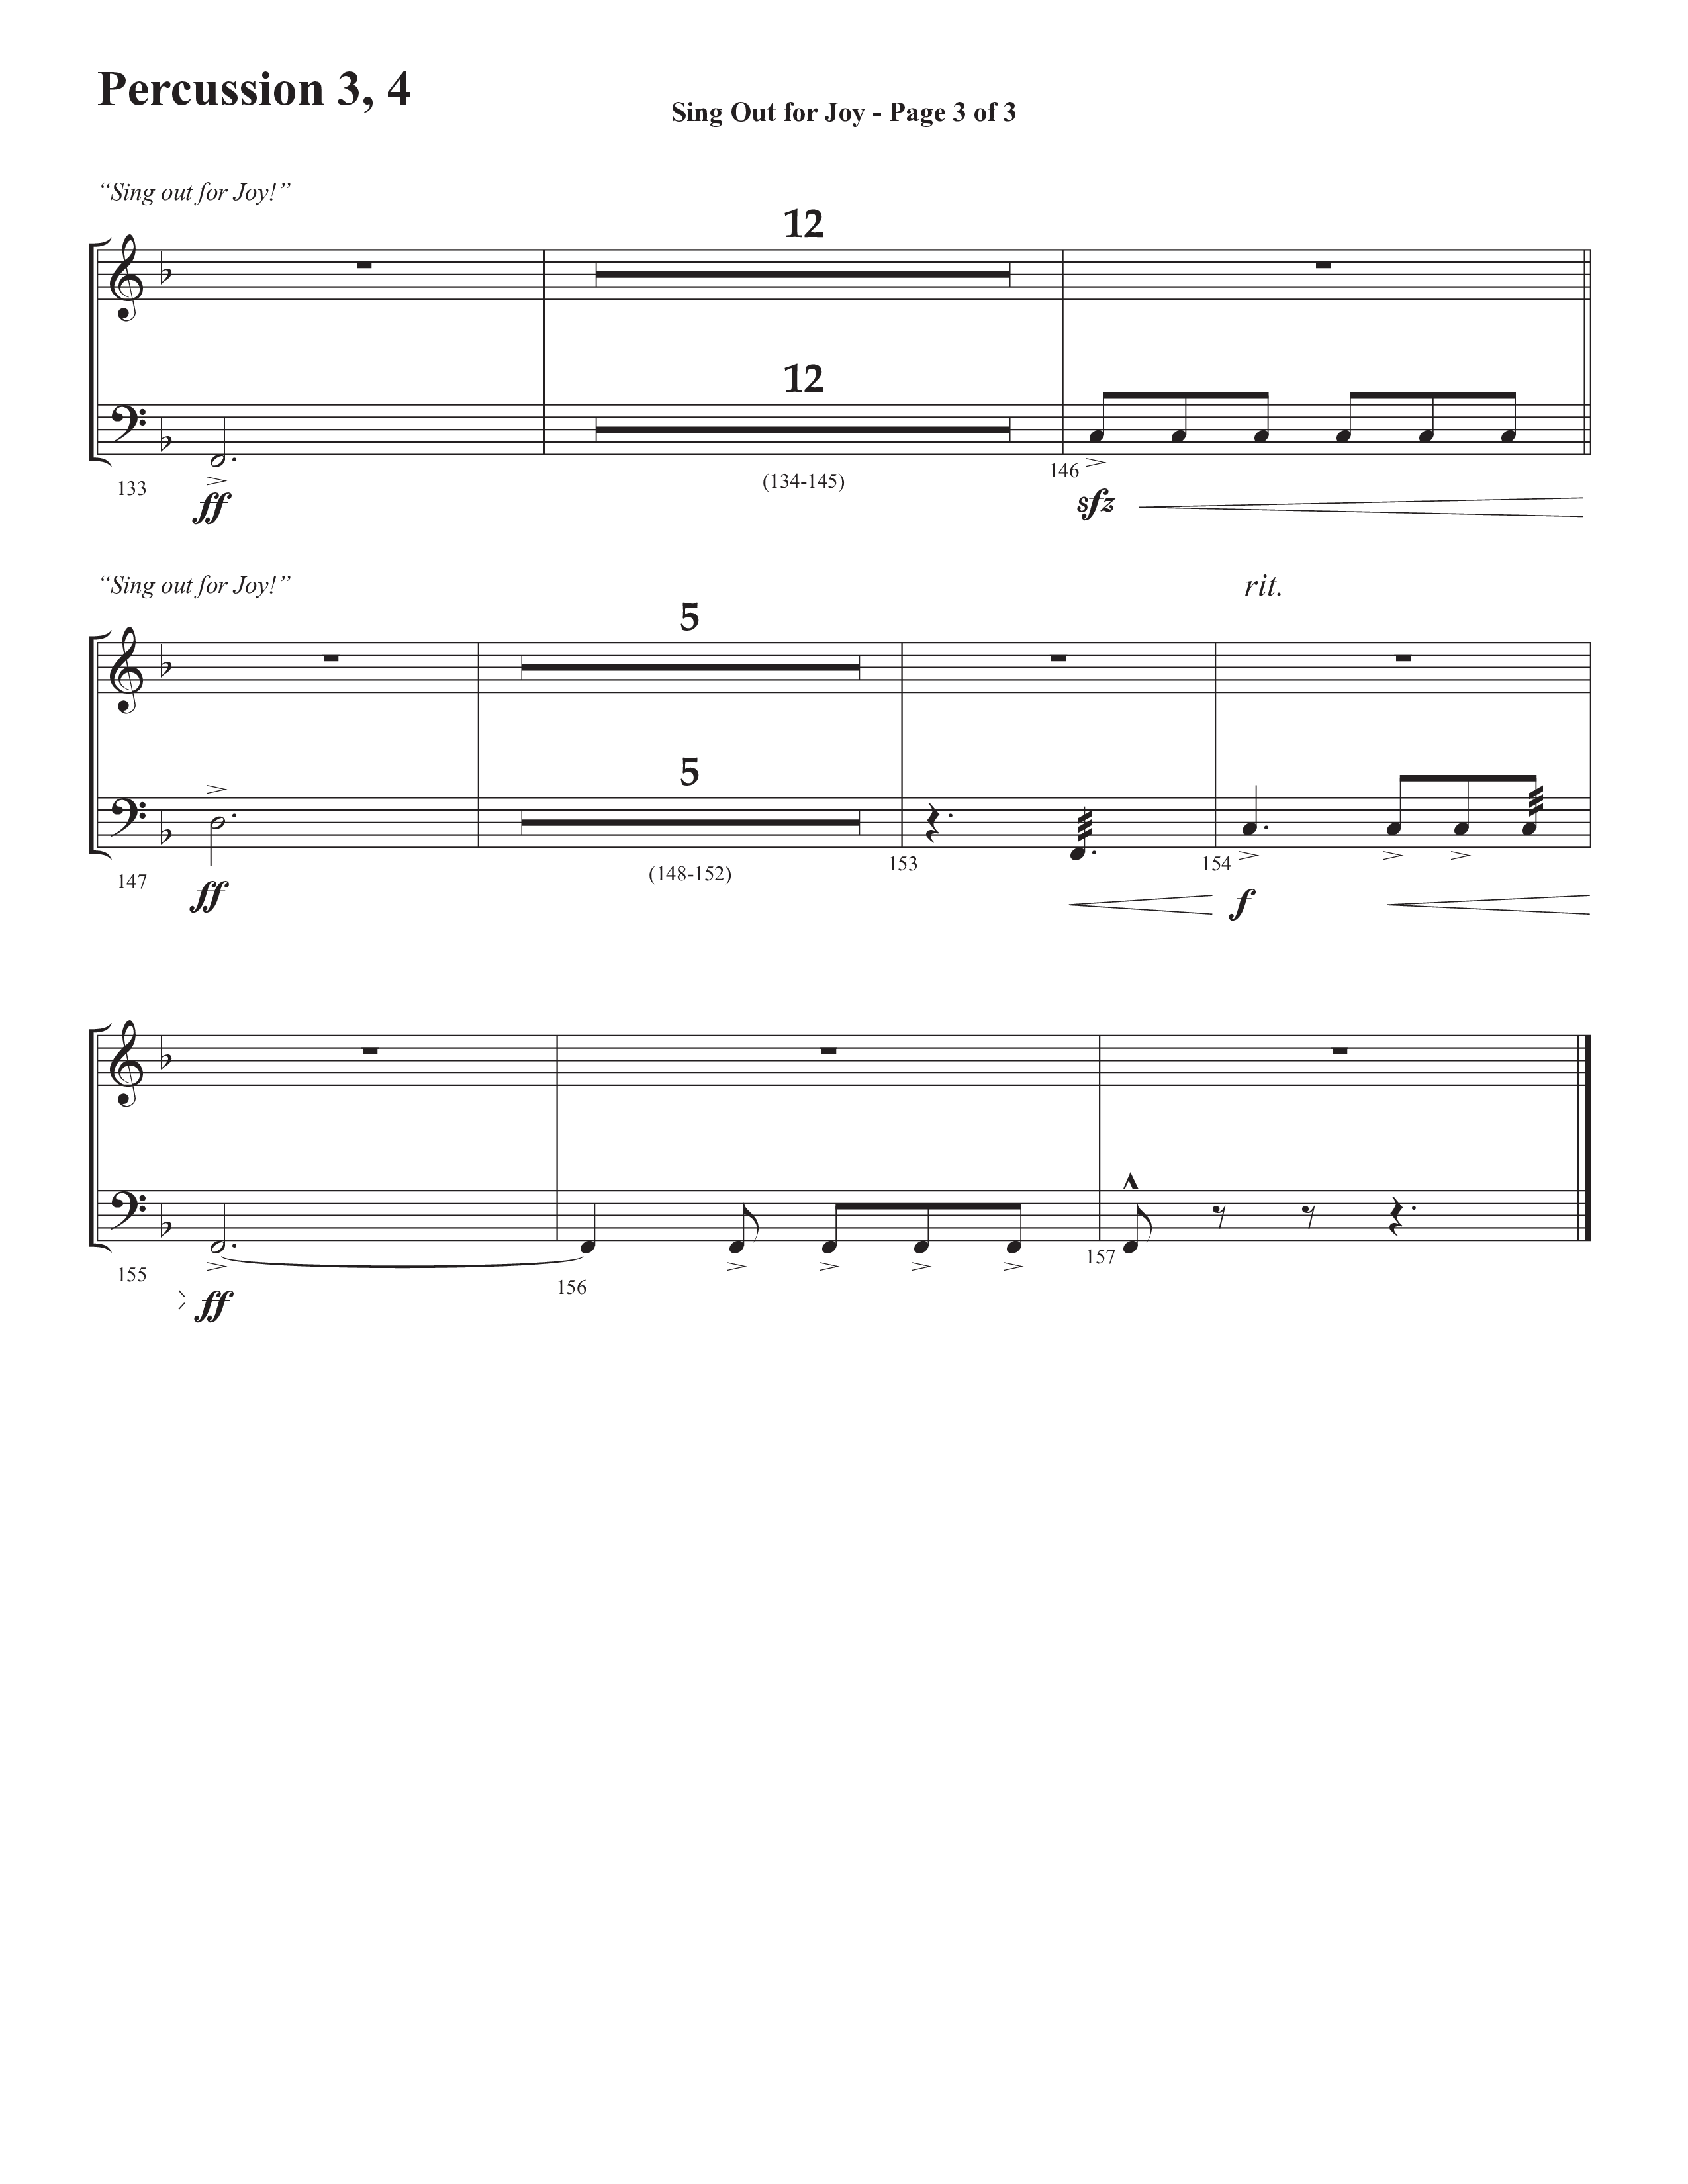 Sing Out For Joy (Choral Anthem SATB) Percussion (Semsen Music / Arr. John Bolin / Orch. Cliff Duren)